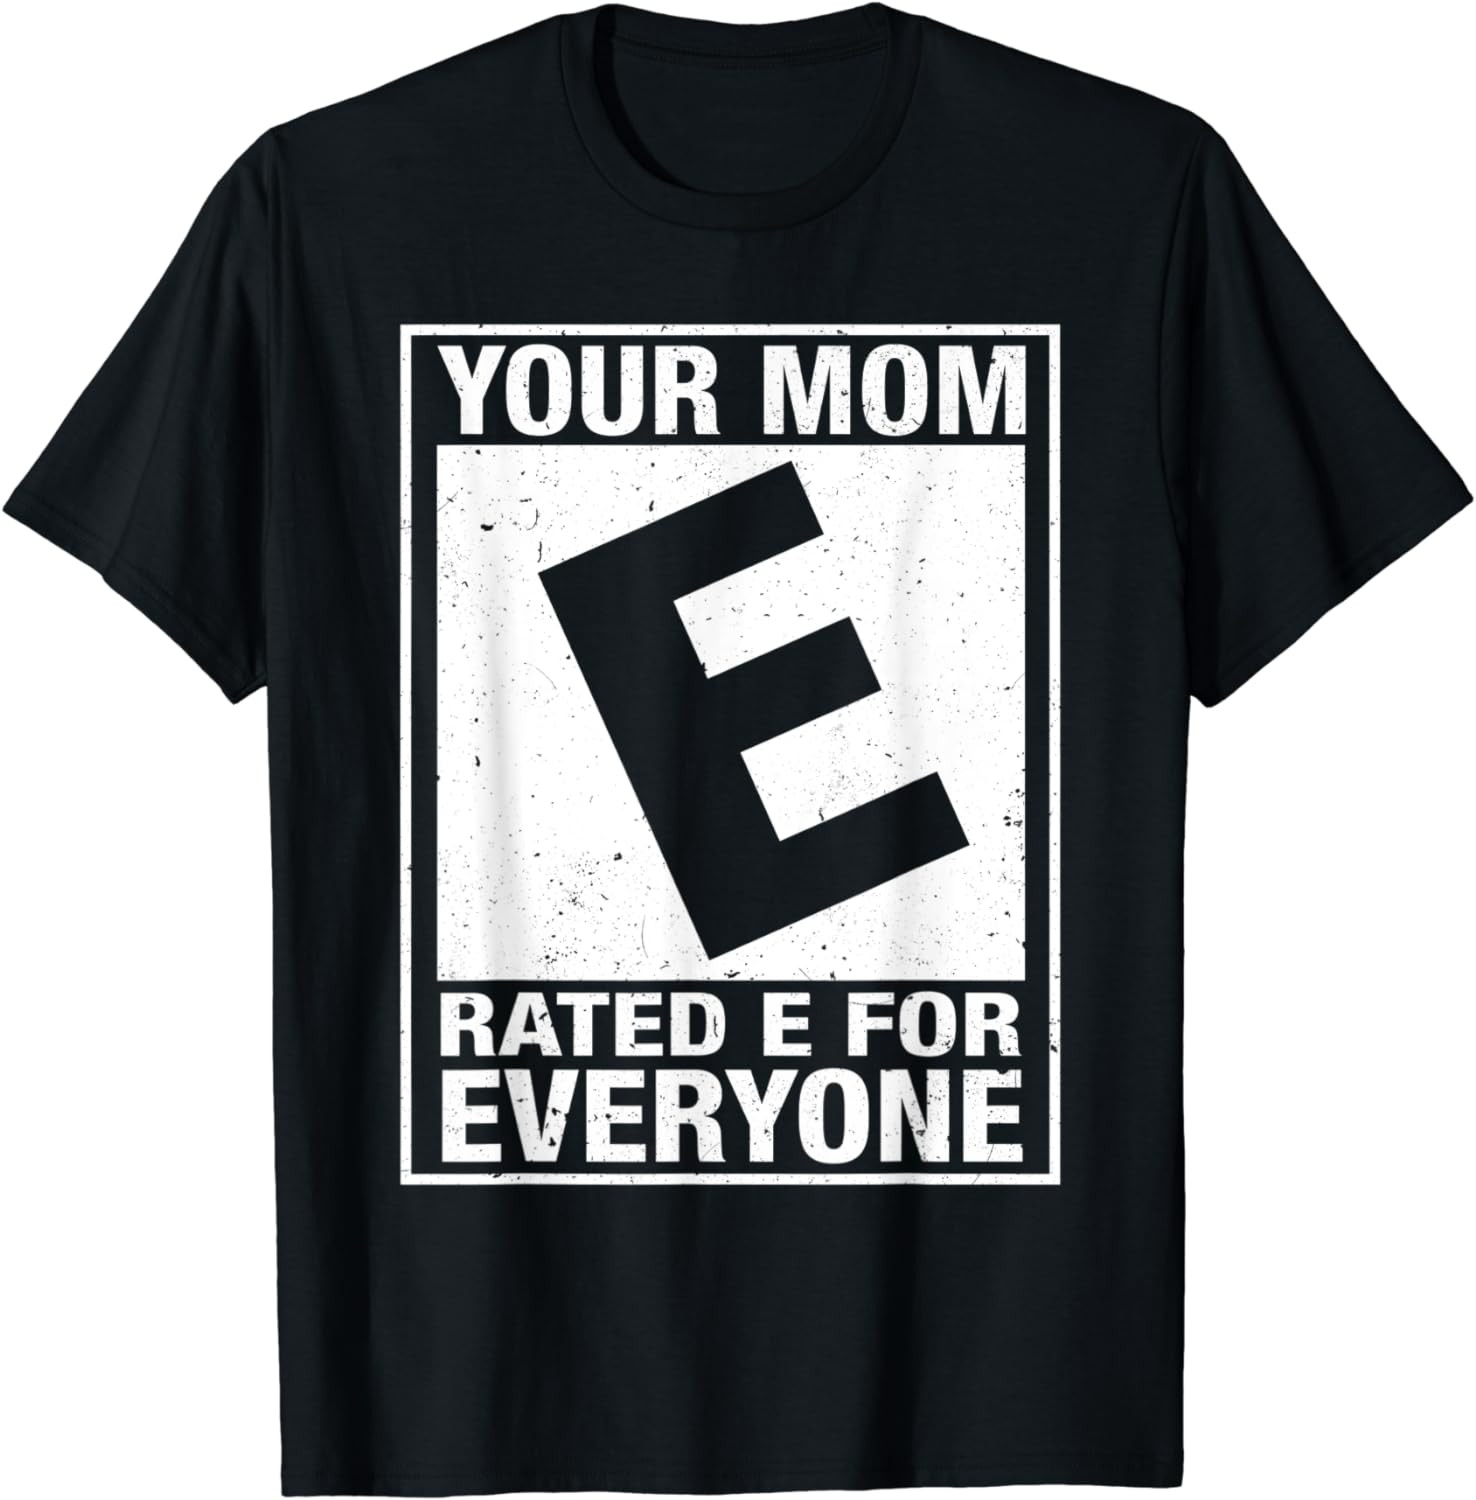 Your Mom Rated E For Everyone Funny Inappropriate Joke T-Shirt